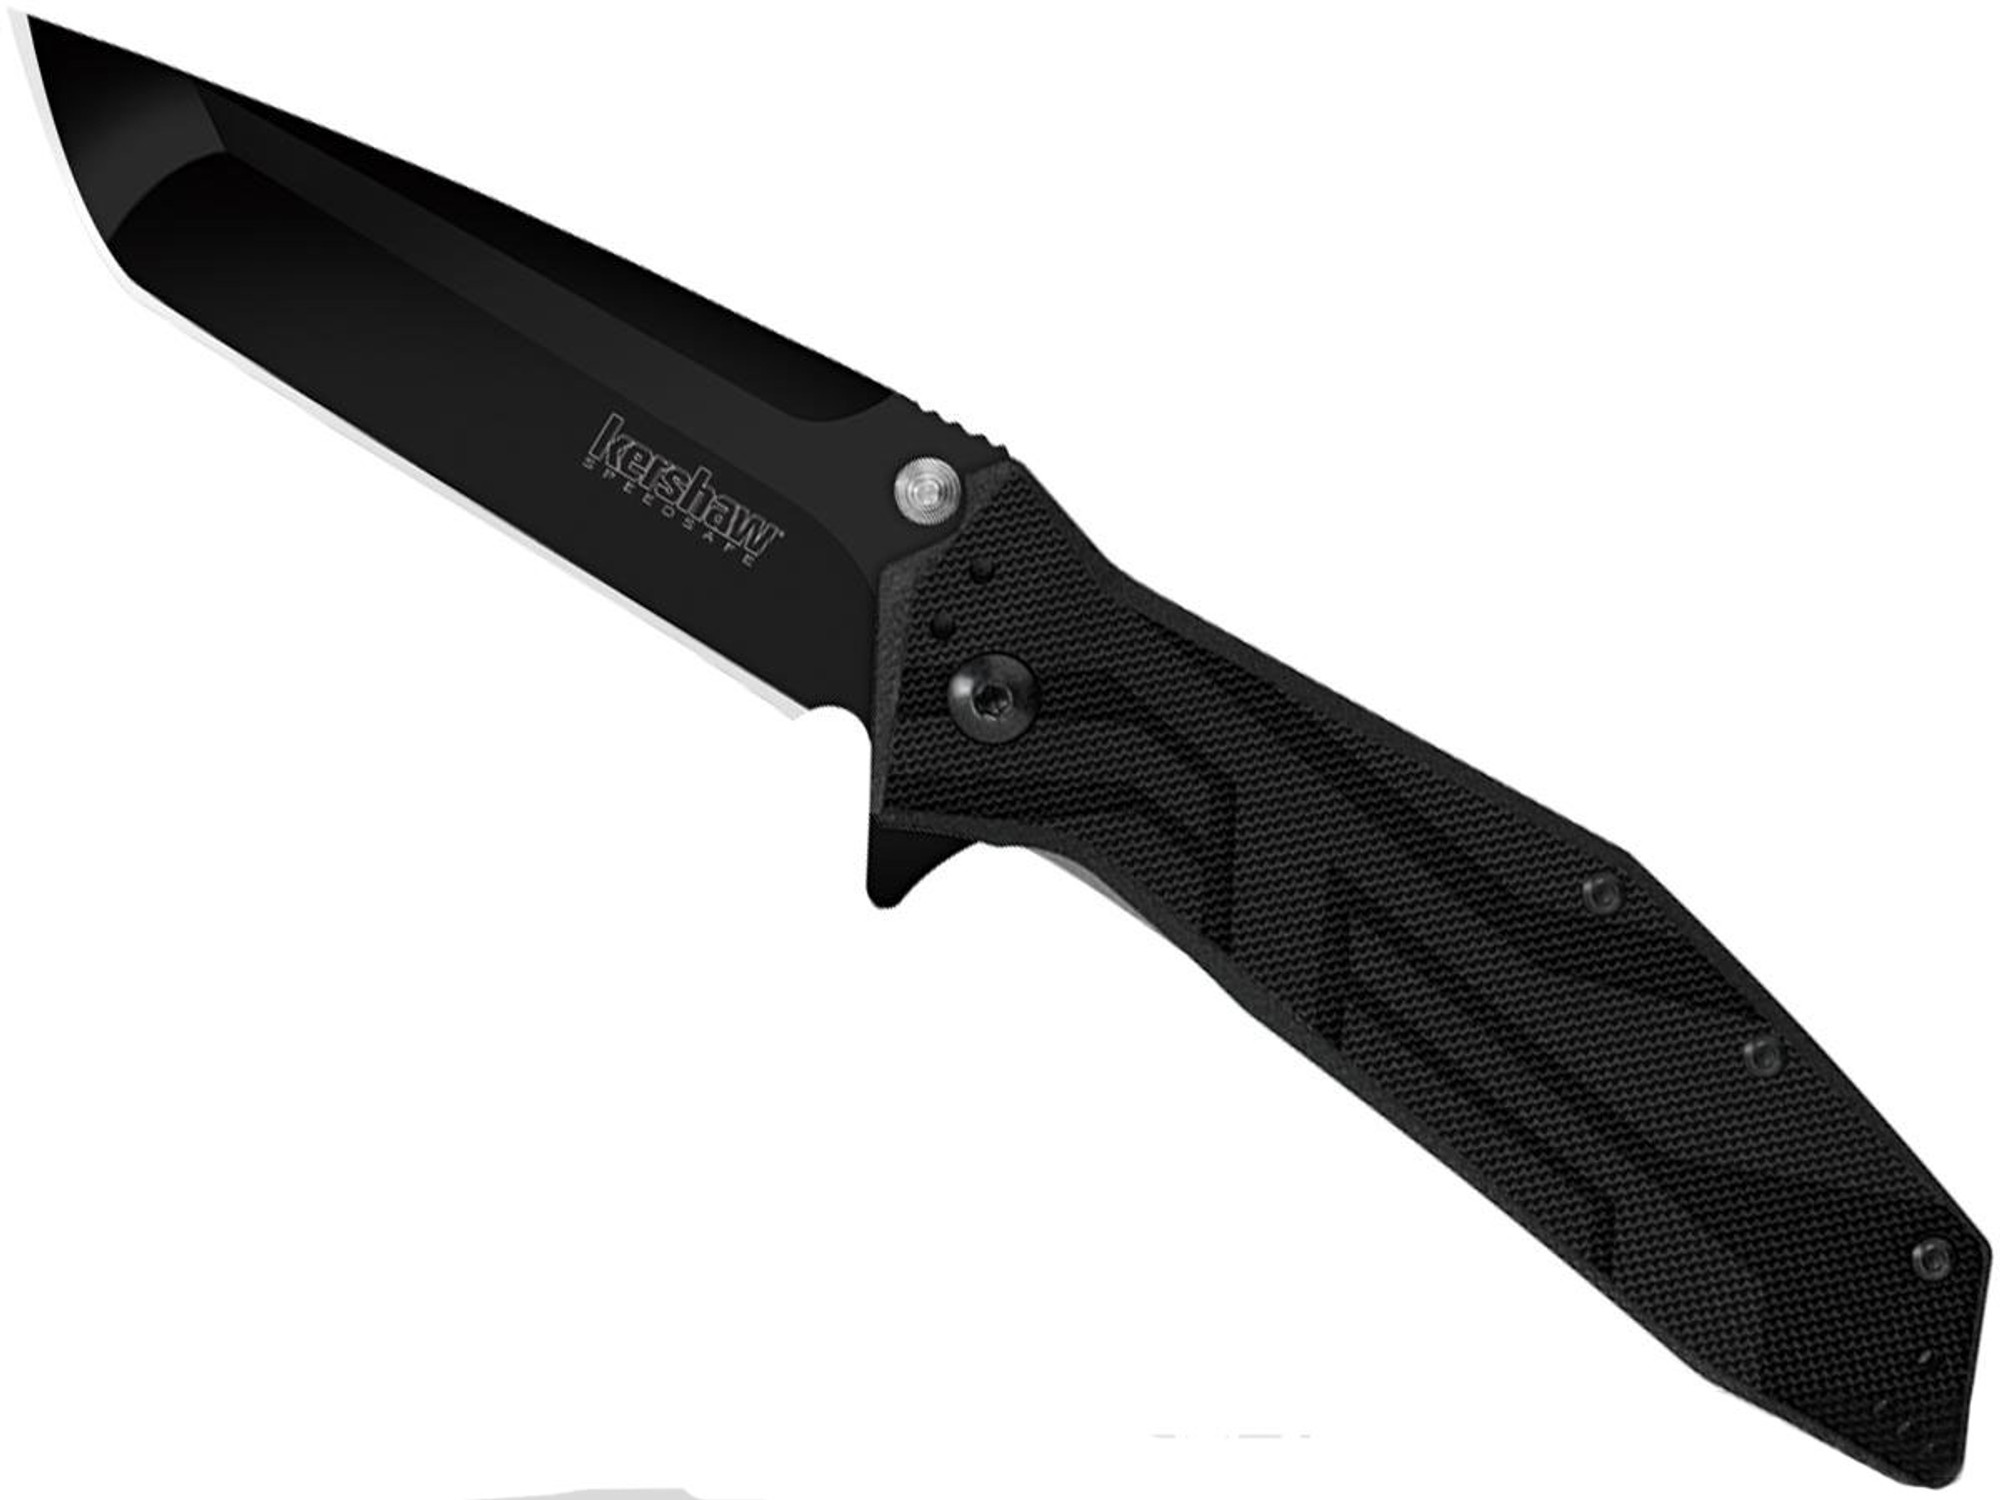 Kershaw Brawler Folding Knife with 3.25" Blade and Speed Assist Opening